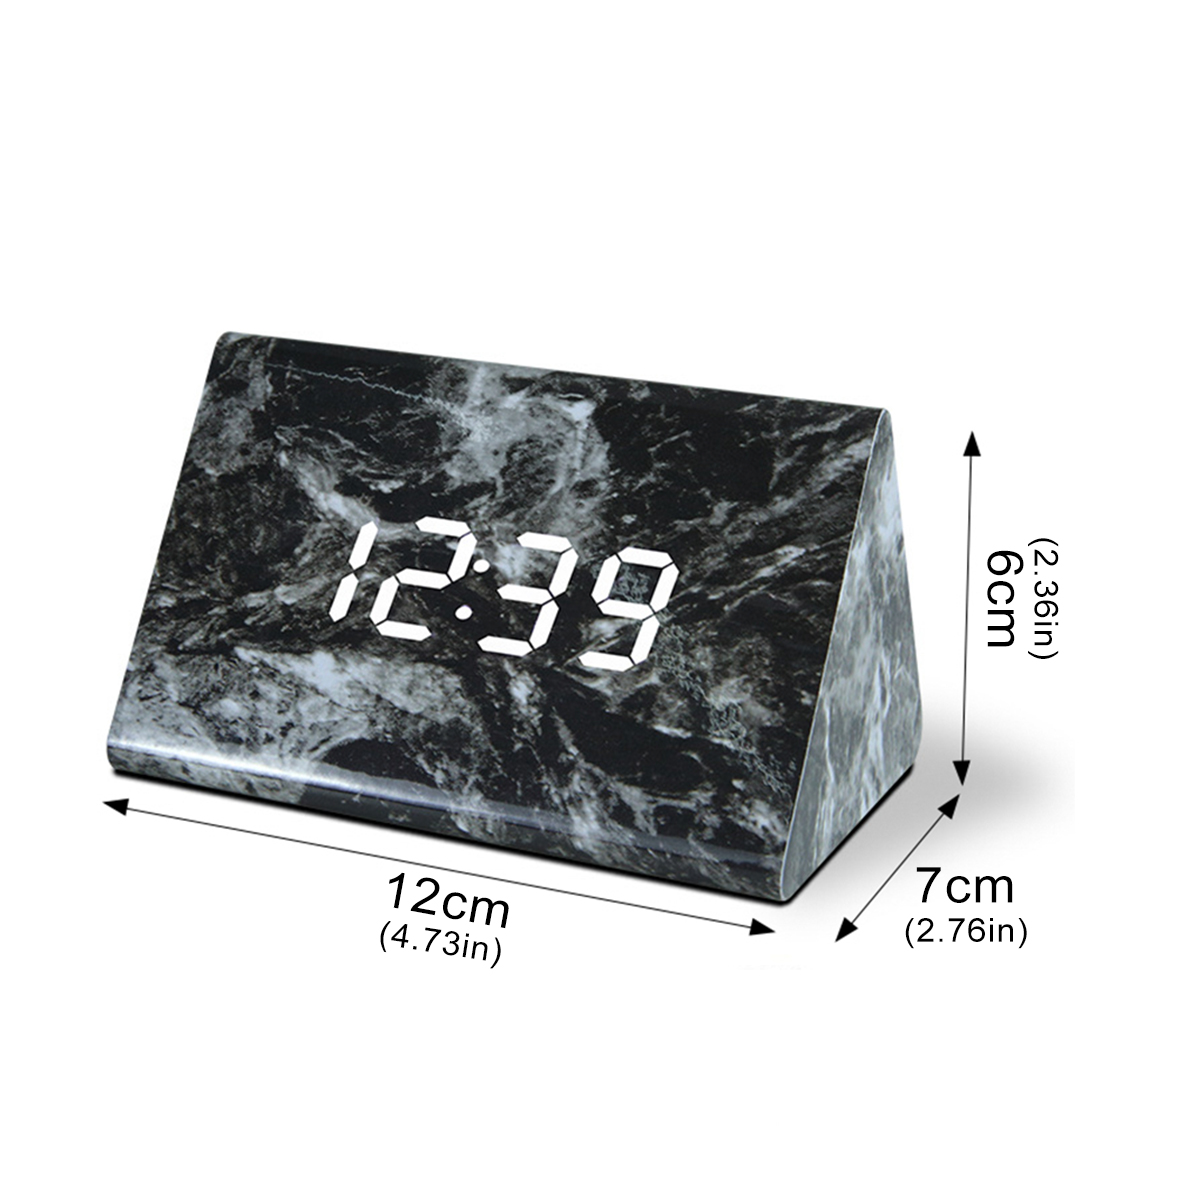 Bakeey-LED-Digital-Display-Alarm-Clock-Voice-Control-Table-Snooze-Clocks-For-Bedrooms-1813854-7